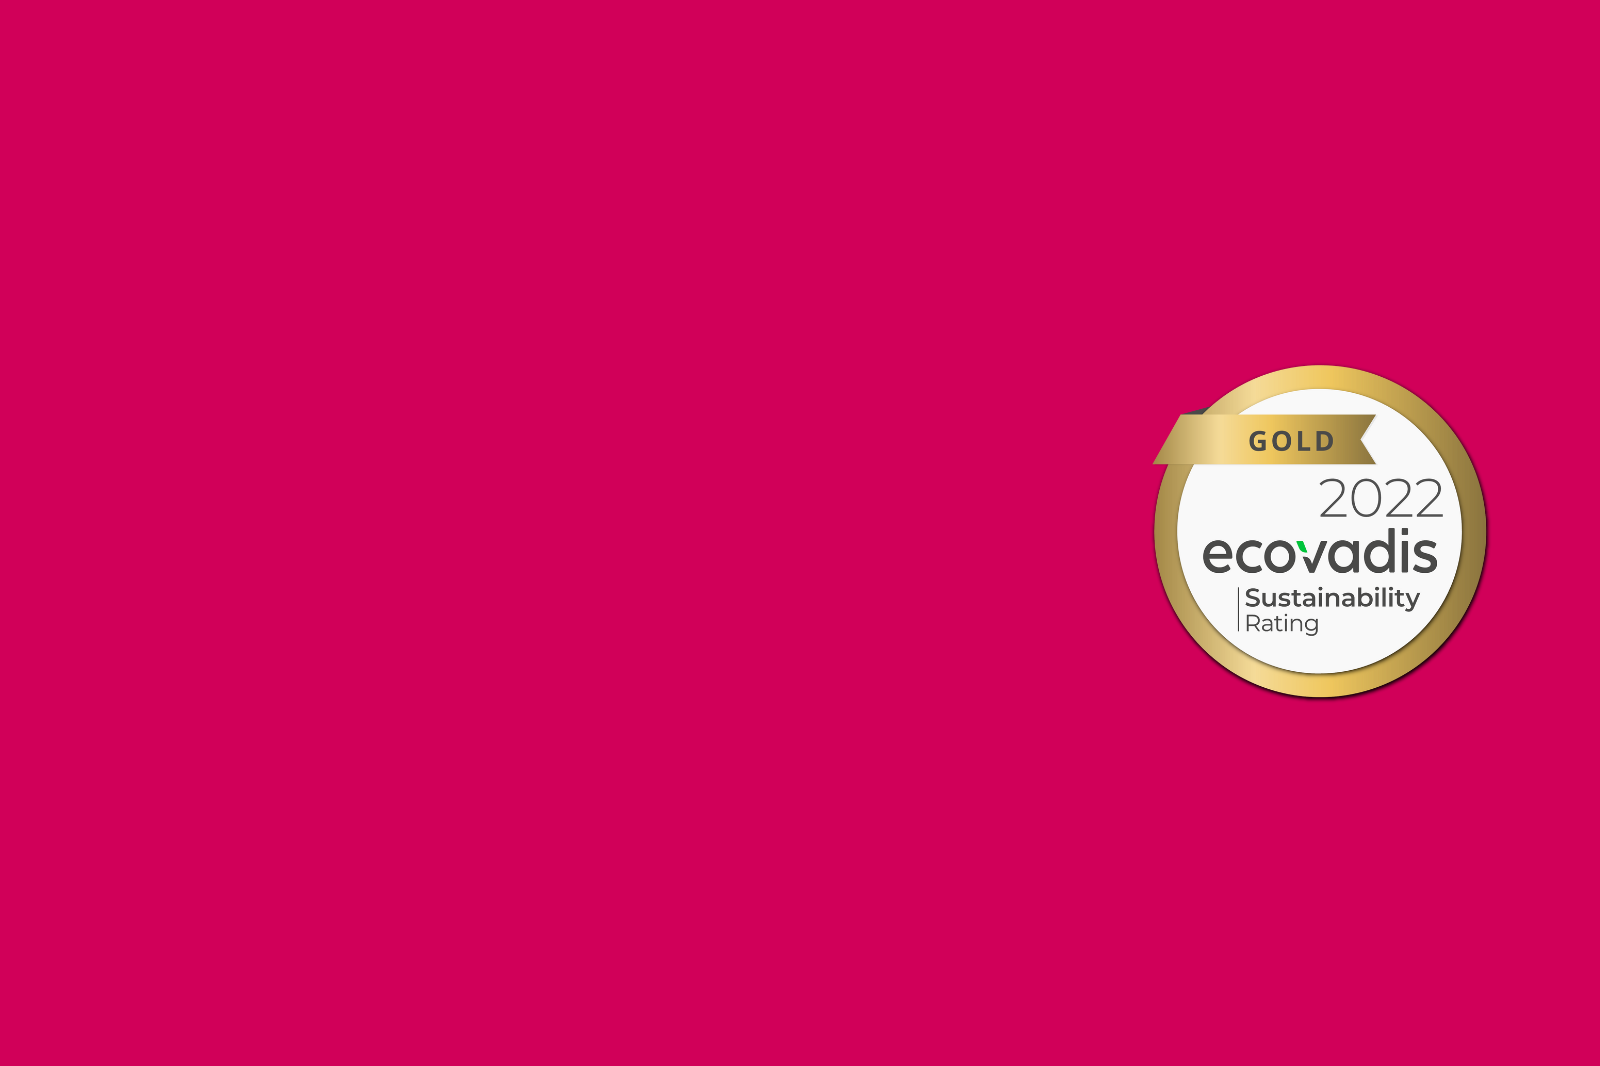 A pink background with a gold logo on it becomes greener with gold accreditation and £1m spend.